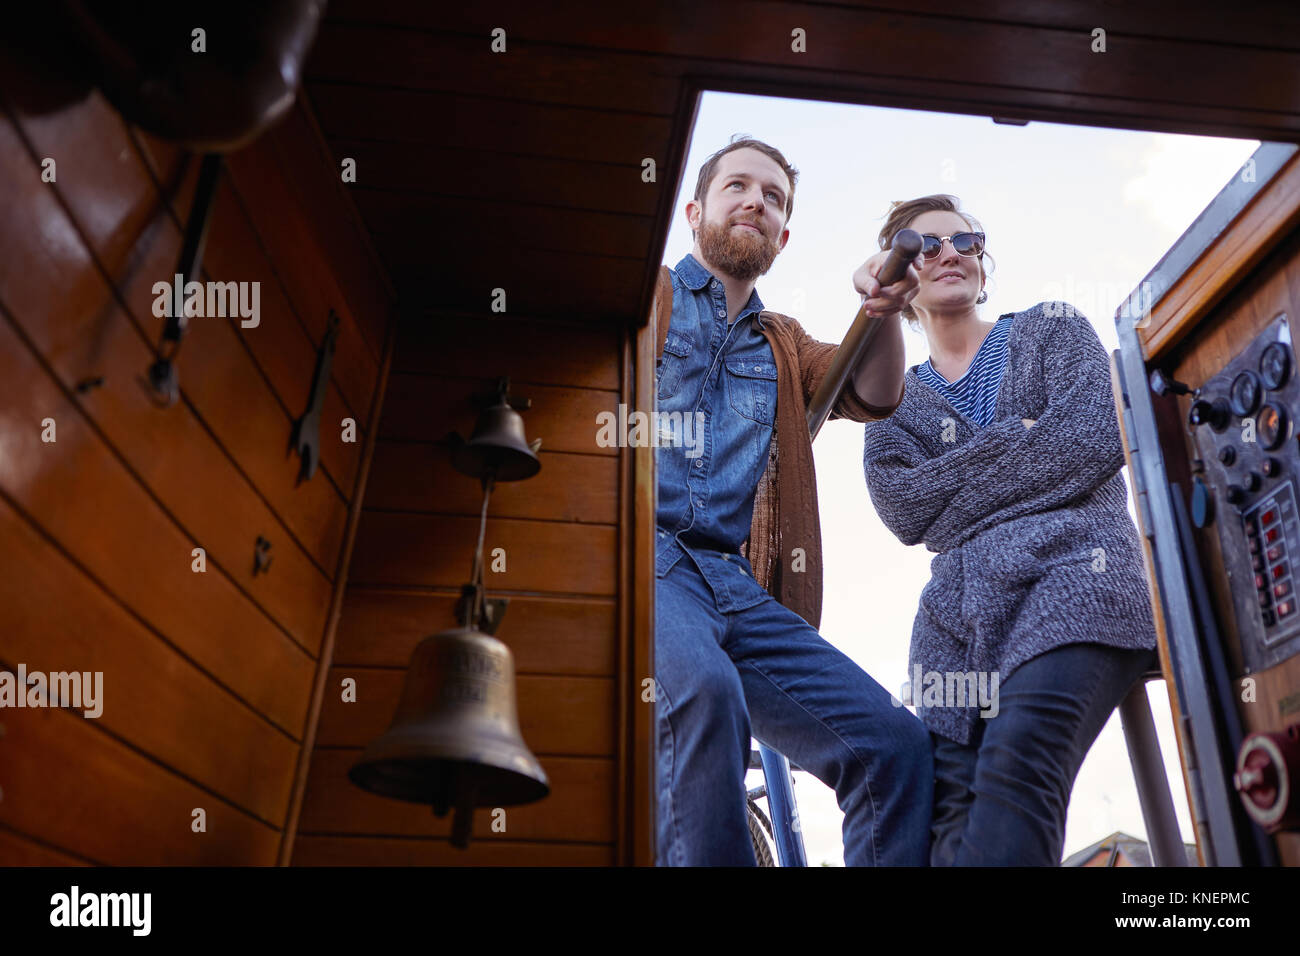 Couple steering canal boat Stock Photo